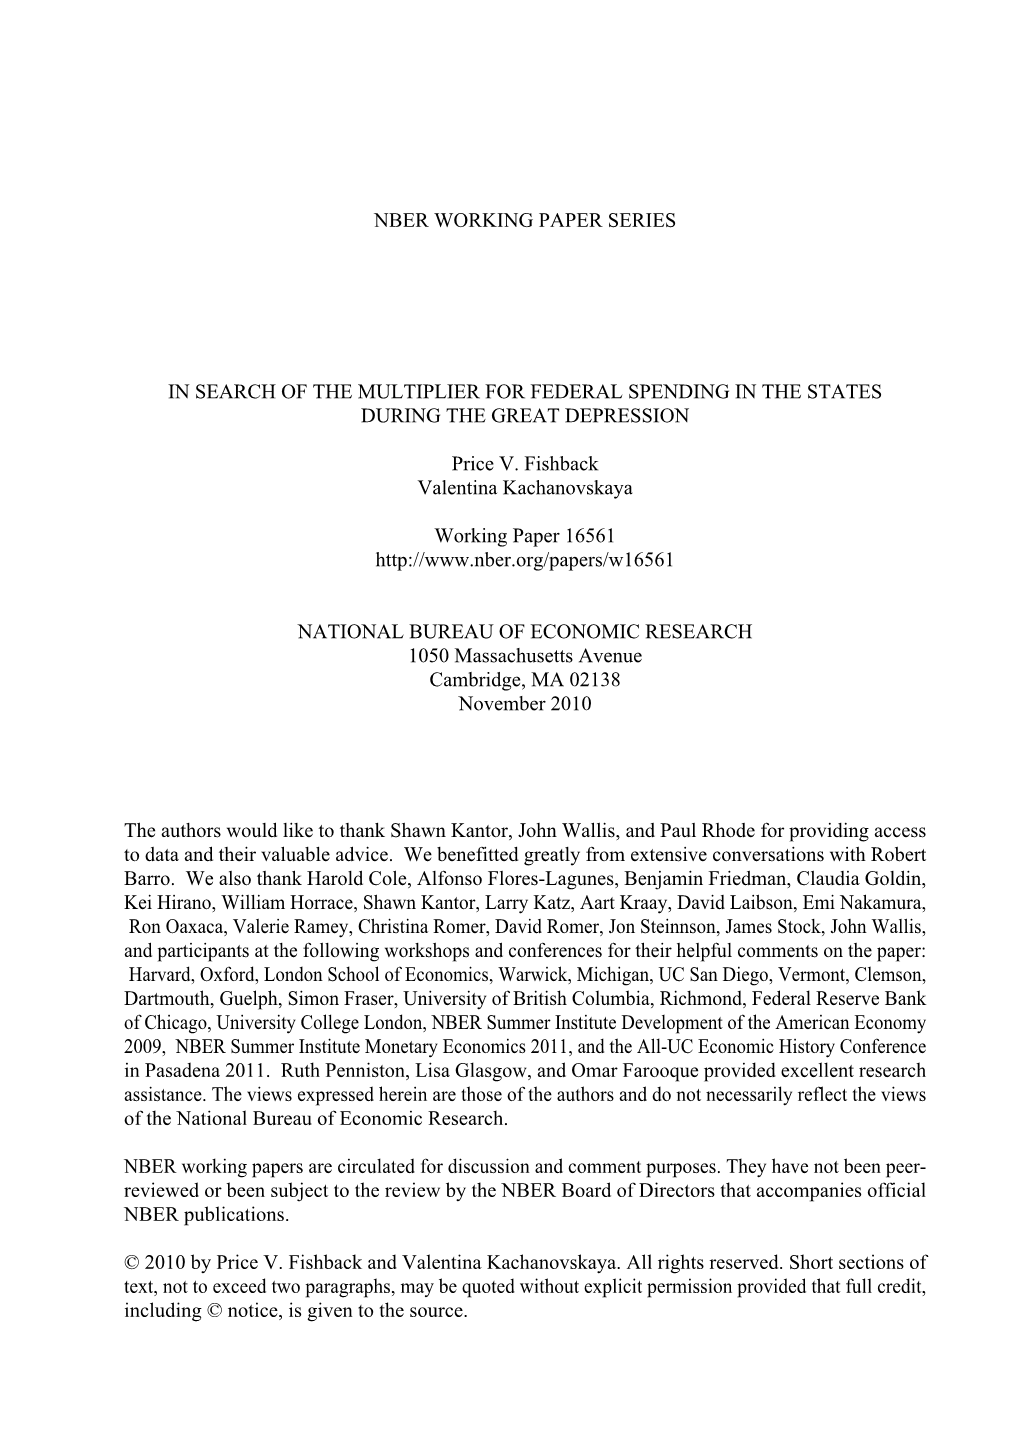 Nber Working Paper Series in Search of the Multiplier